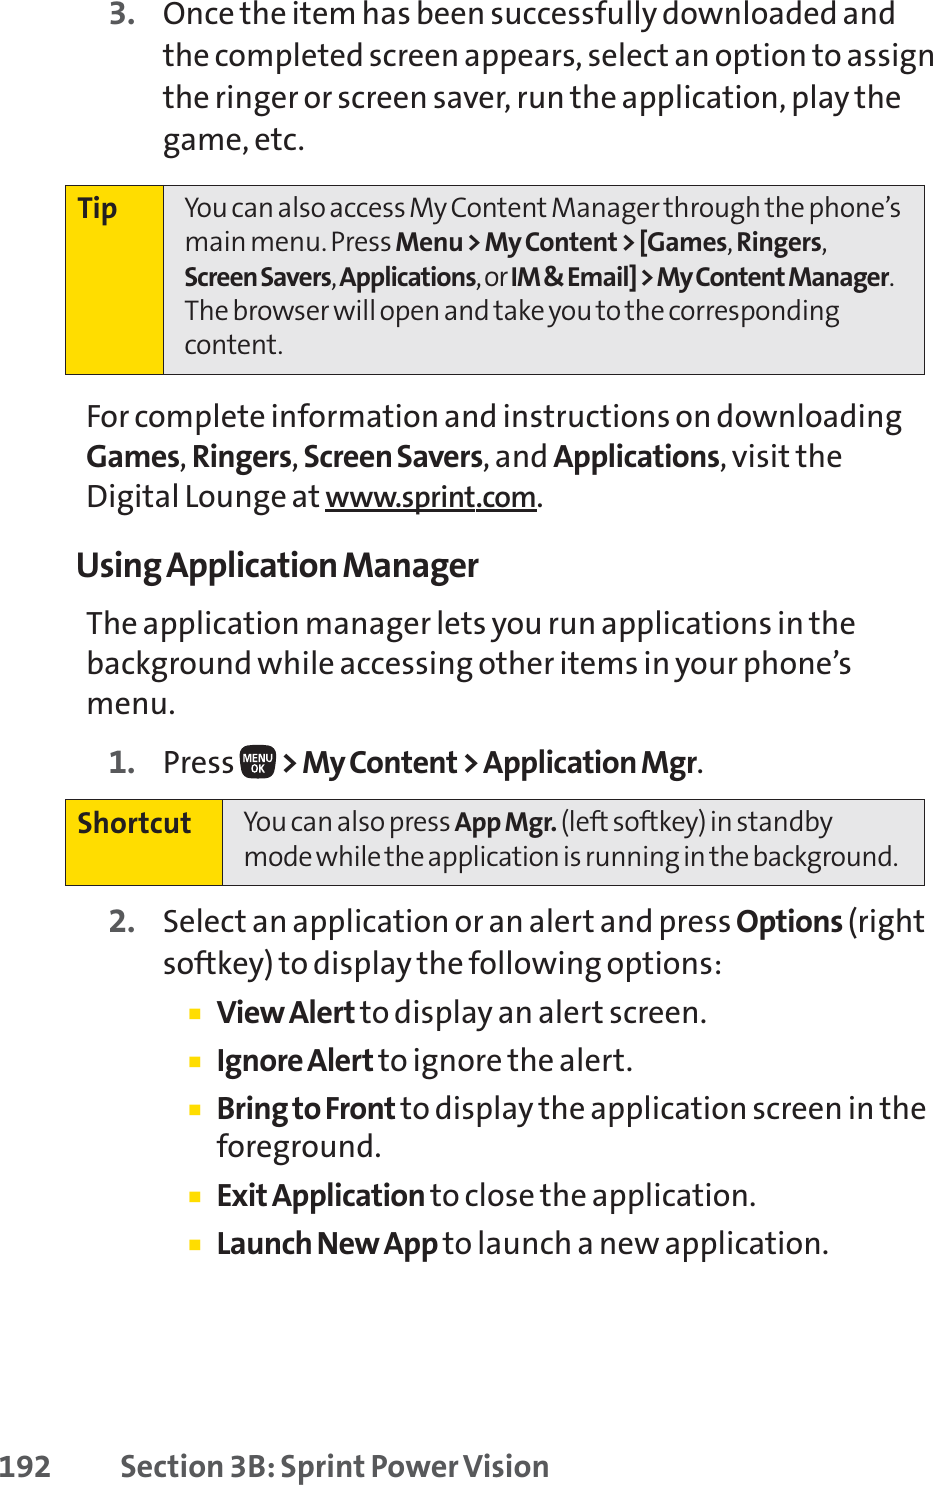 192 Section 3B: Sprint Power Vision3. Once the item has been successfully downloaded andthe completed screen appears, select an option to assignthe ringer or screen saver, run the application, play thegame, etc.For complete information and instructions on downloadingGames,Ringers,Screen Savers, and Applications, visit theDigital Lounge at www.sprint.com.Using Application ManagerThe application manager lets you run applications in thebackground while accessing other items in your phone’smenu.1. Press  &gt; My Content &gt; Application Mgr.2. Select an application or an alert and press Options (rightsoftkey) to display the following options:䡲View Alert to display an alert screen.䡲Ignore Alert to ignore the alert.䡲Bring to Front to display the application screen in theforeground.䡲Exit Application to close the application.䡲Launch New App to launch a new application.Shortcut You can also press App Mgr. (left softkey) in standbymode while the application is running in the background.Tip You can also access My Content Manager through the phone’smain menu. Press Menu &gt; My Content &gt; [Games,Ringers,Screen Savers,Applications,or IM &amp; Email] &gt; My Content Manager.The browser will open and take you to the correspondingcontent.